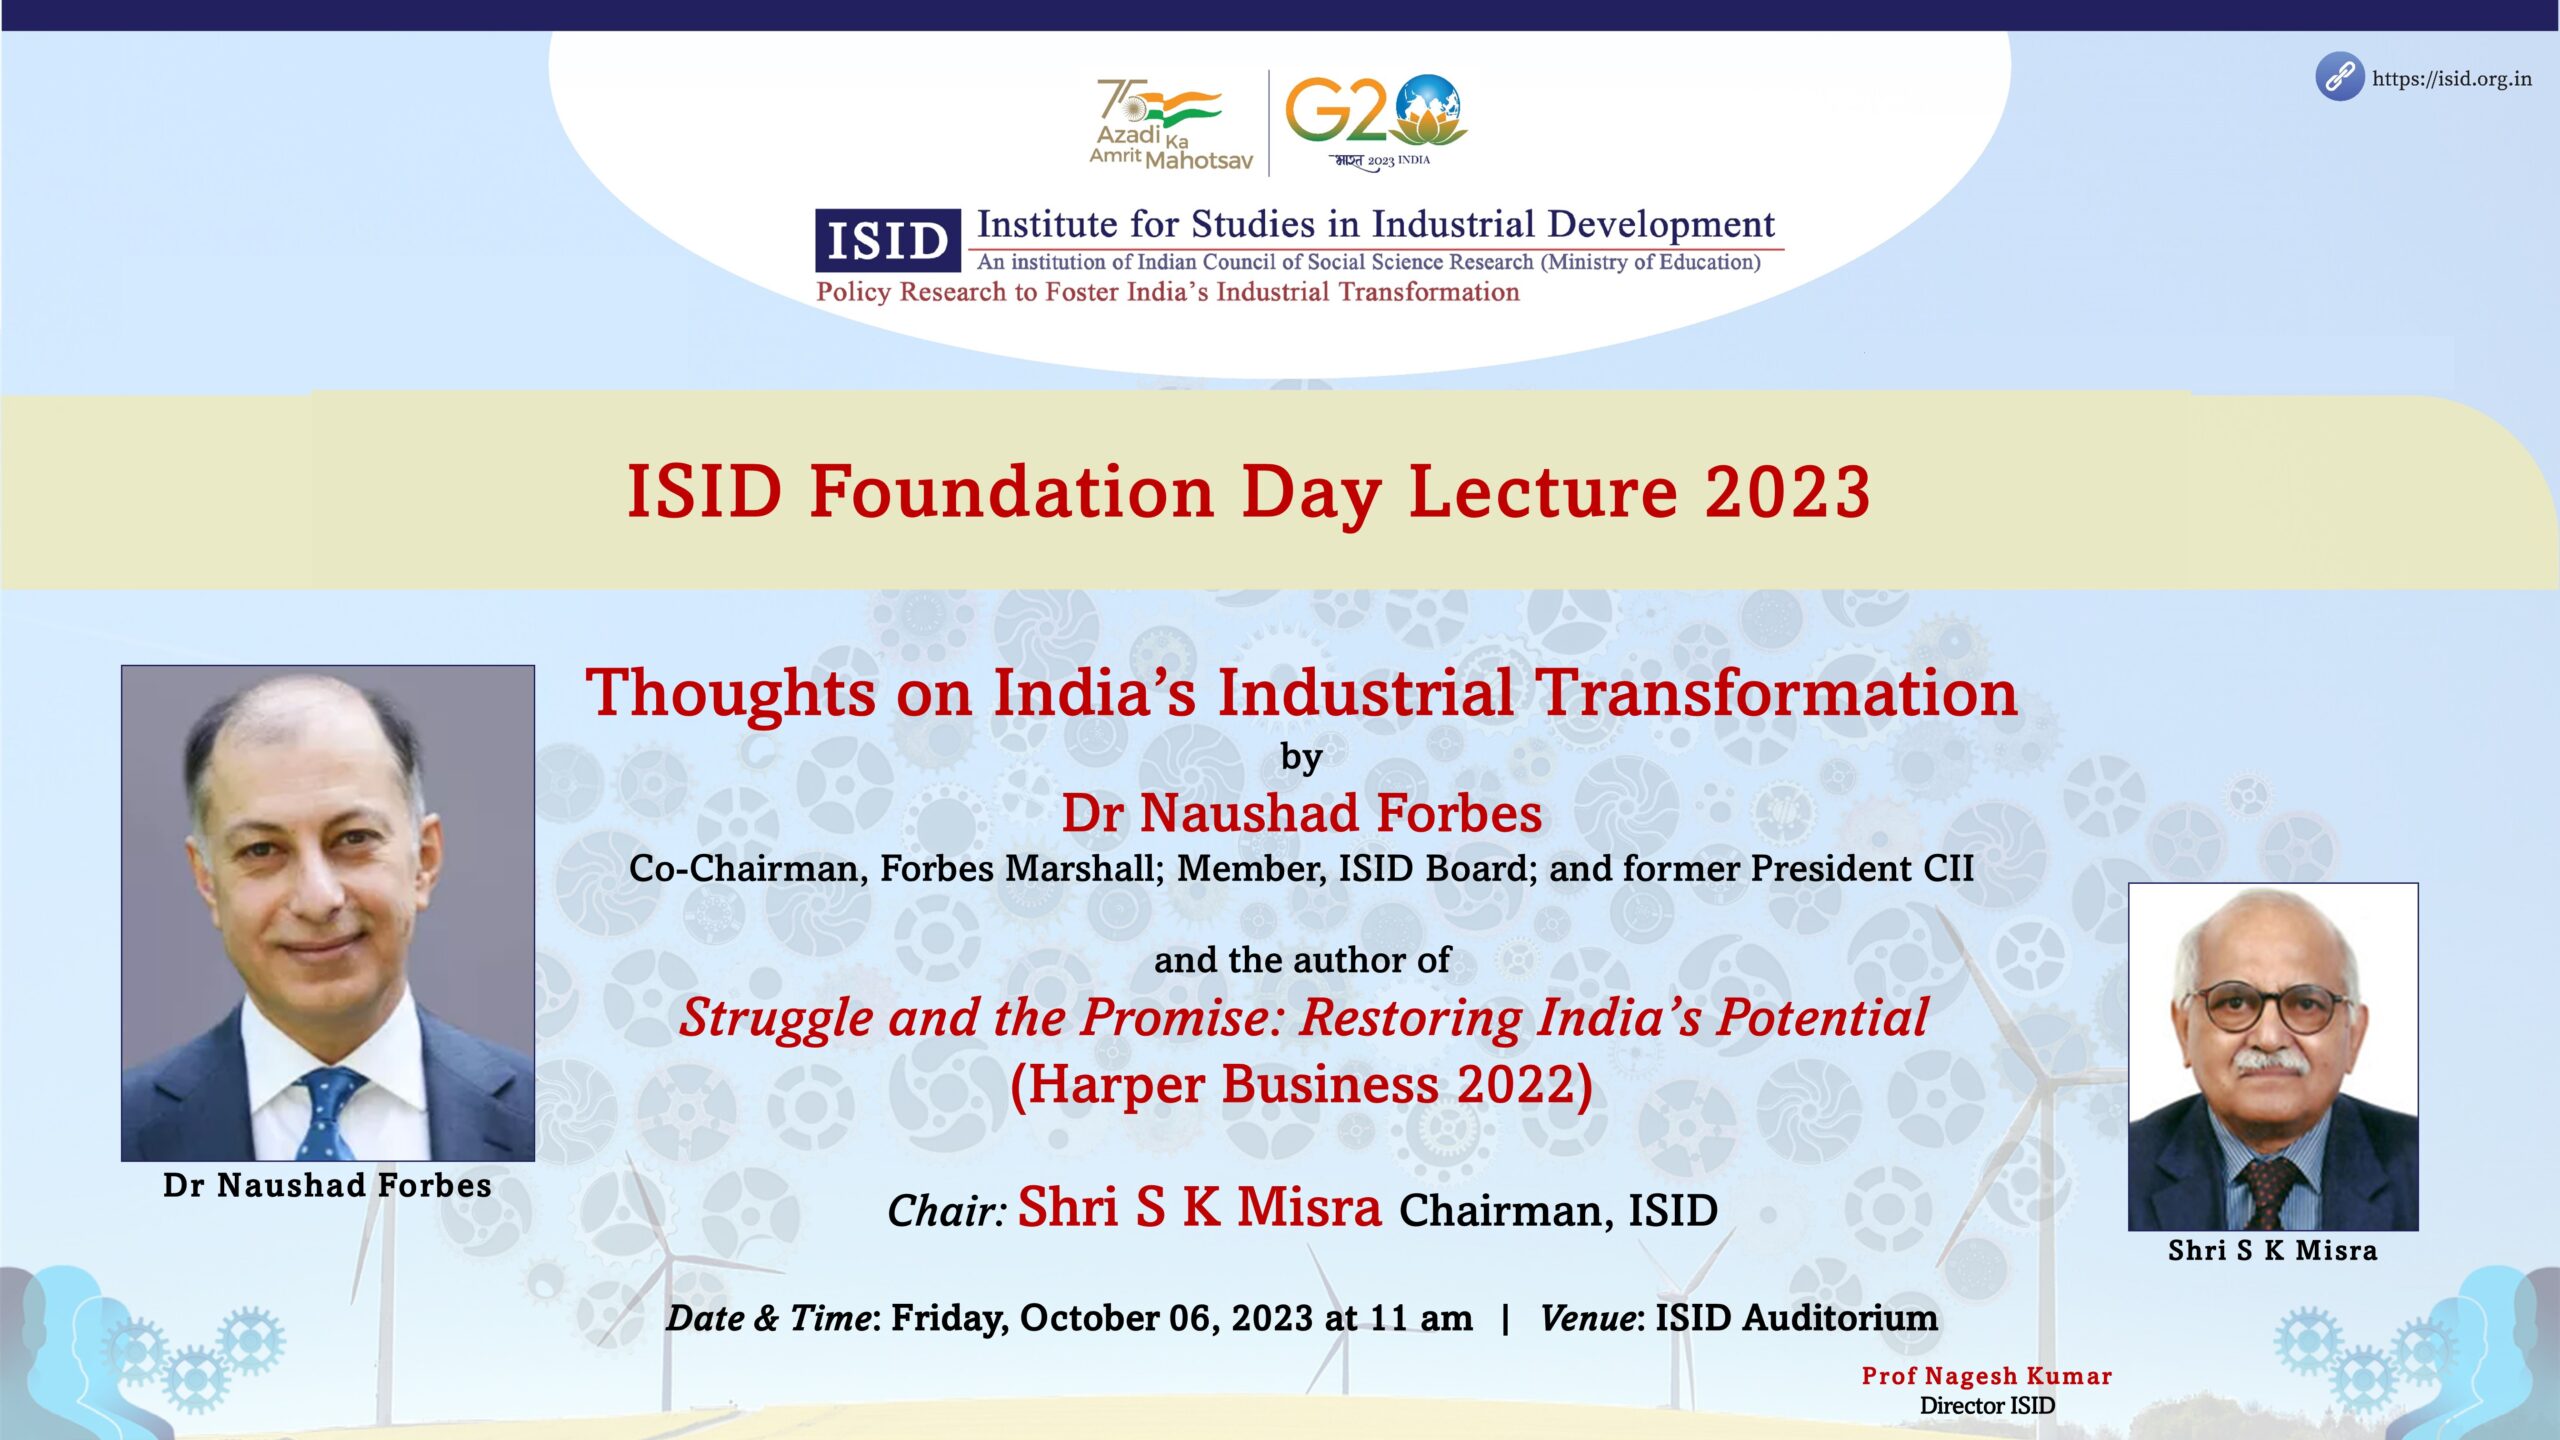 ISID Foundation Day Lecture 2023 by Dr Naushad Forbes, Co-Chairman, Forbes Marshall